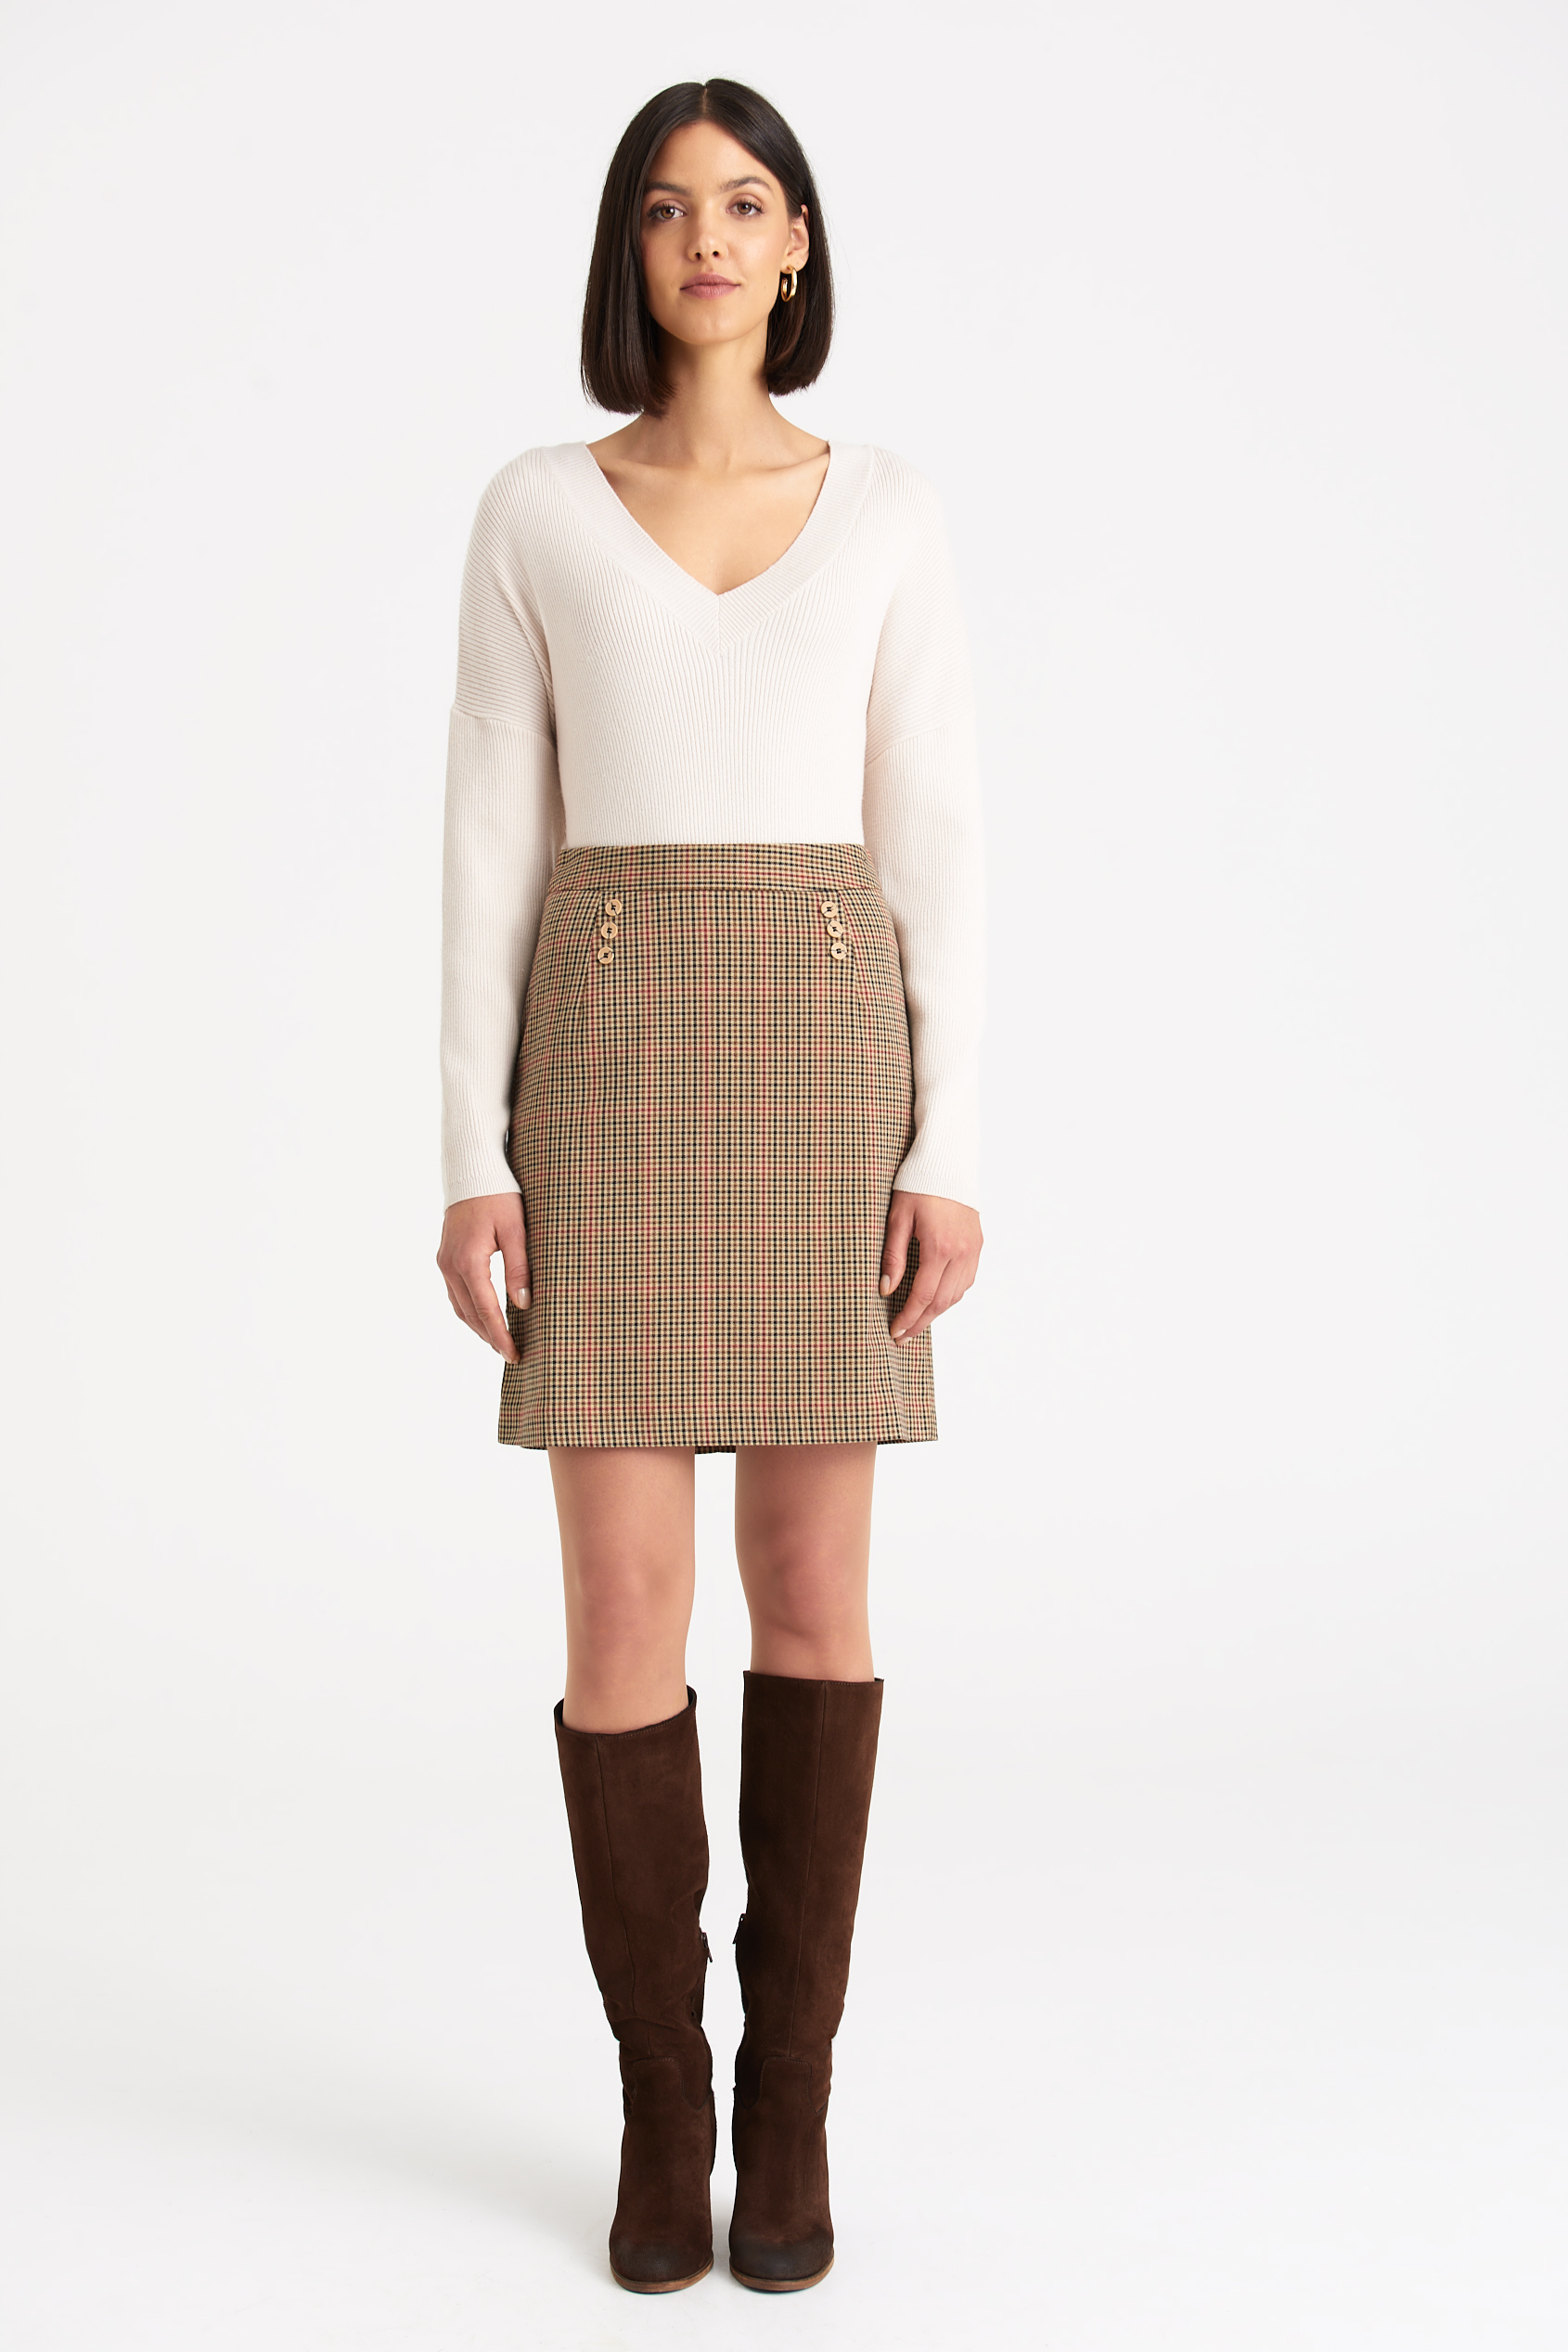 Greenpoint Woman's Skirt SPC306W22CHE01